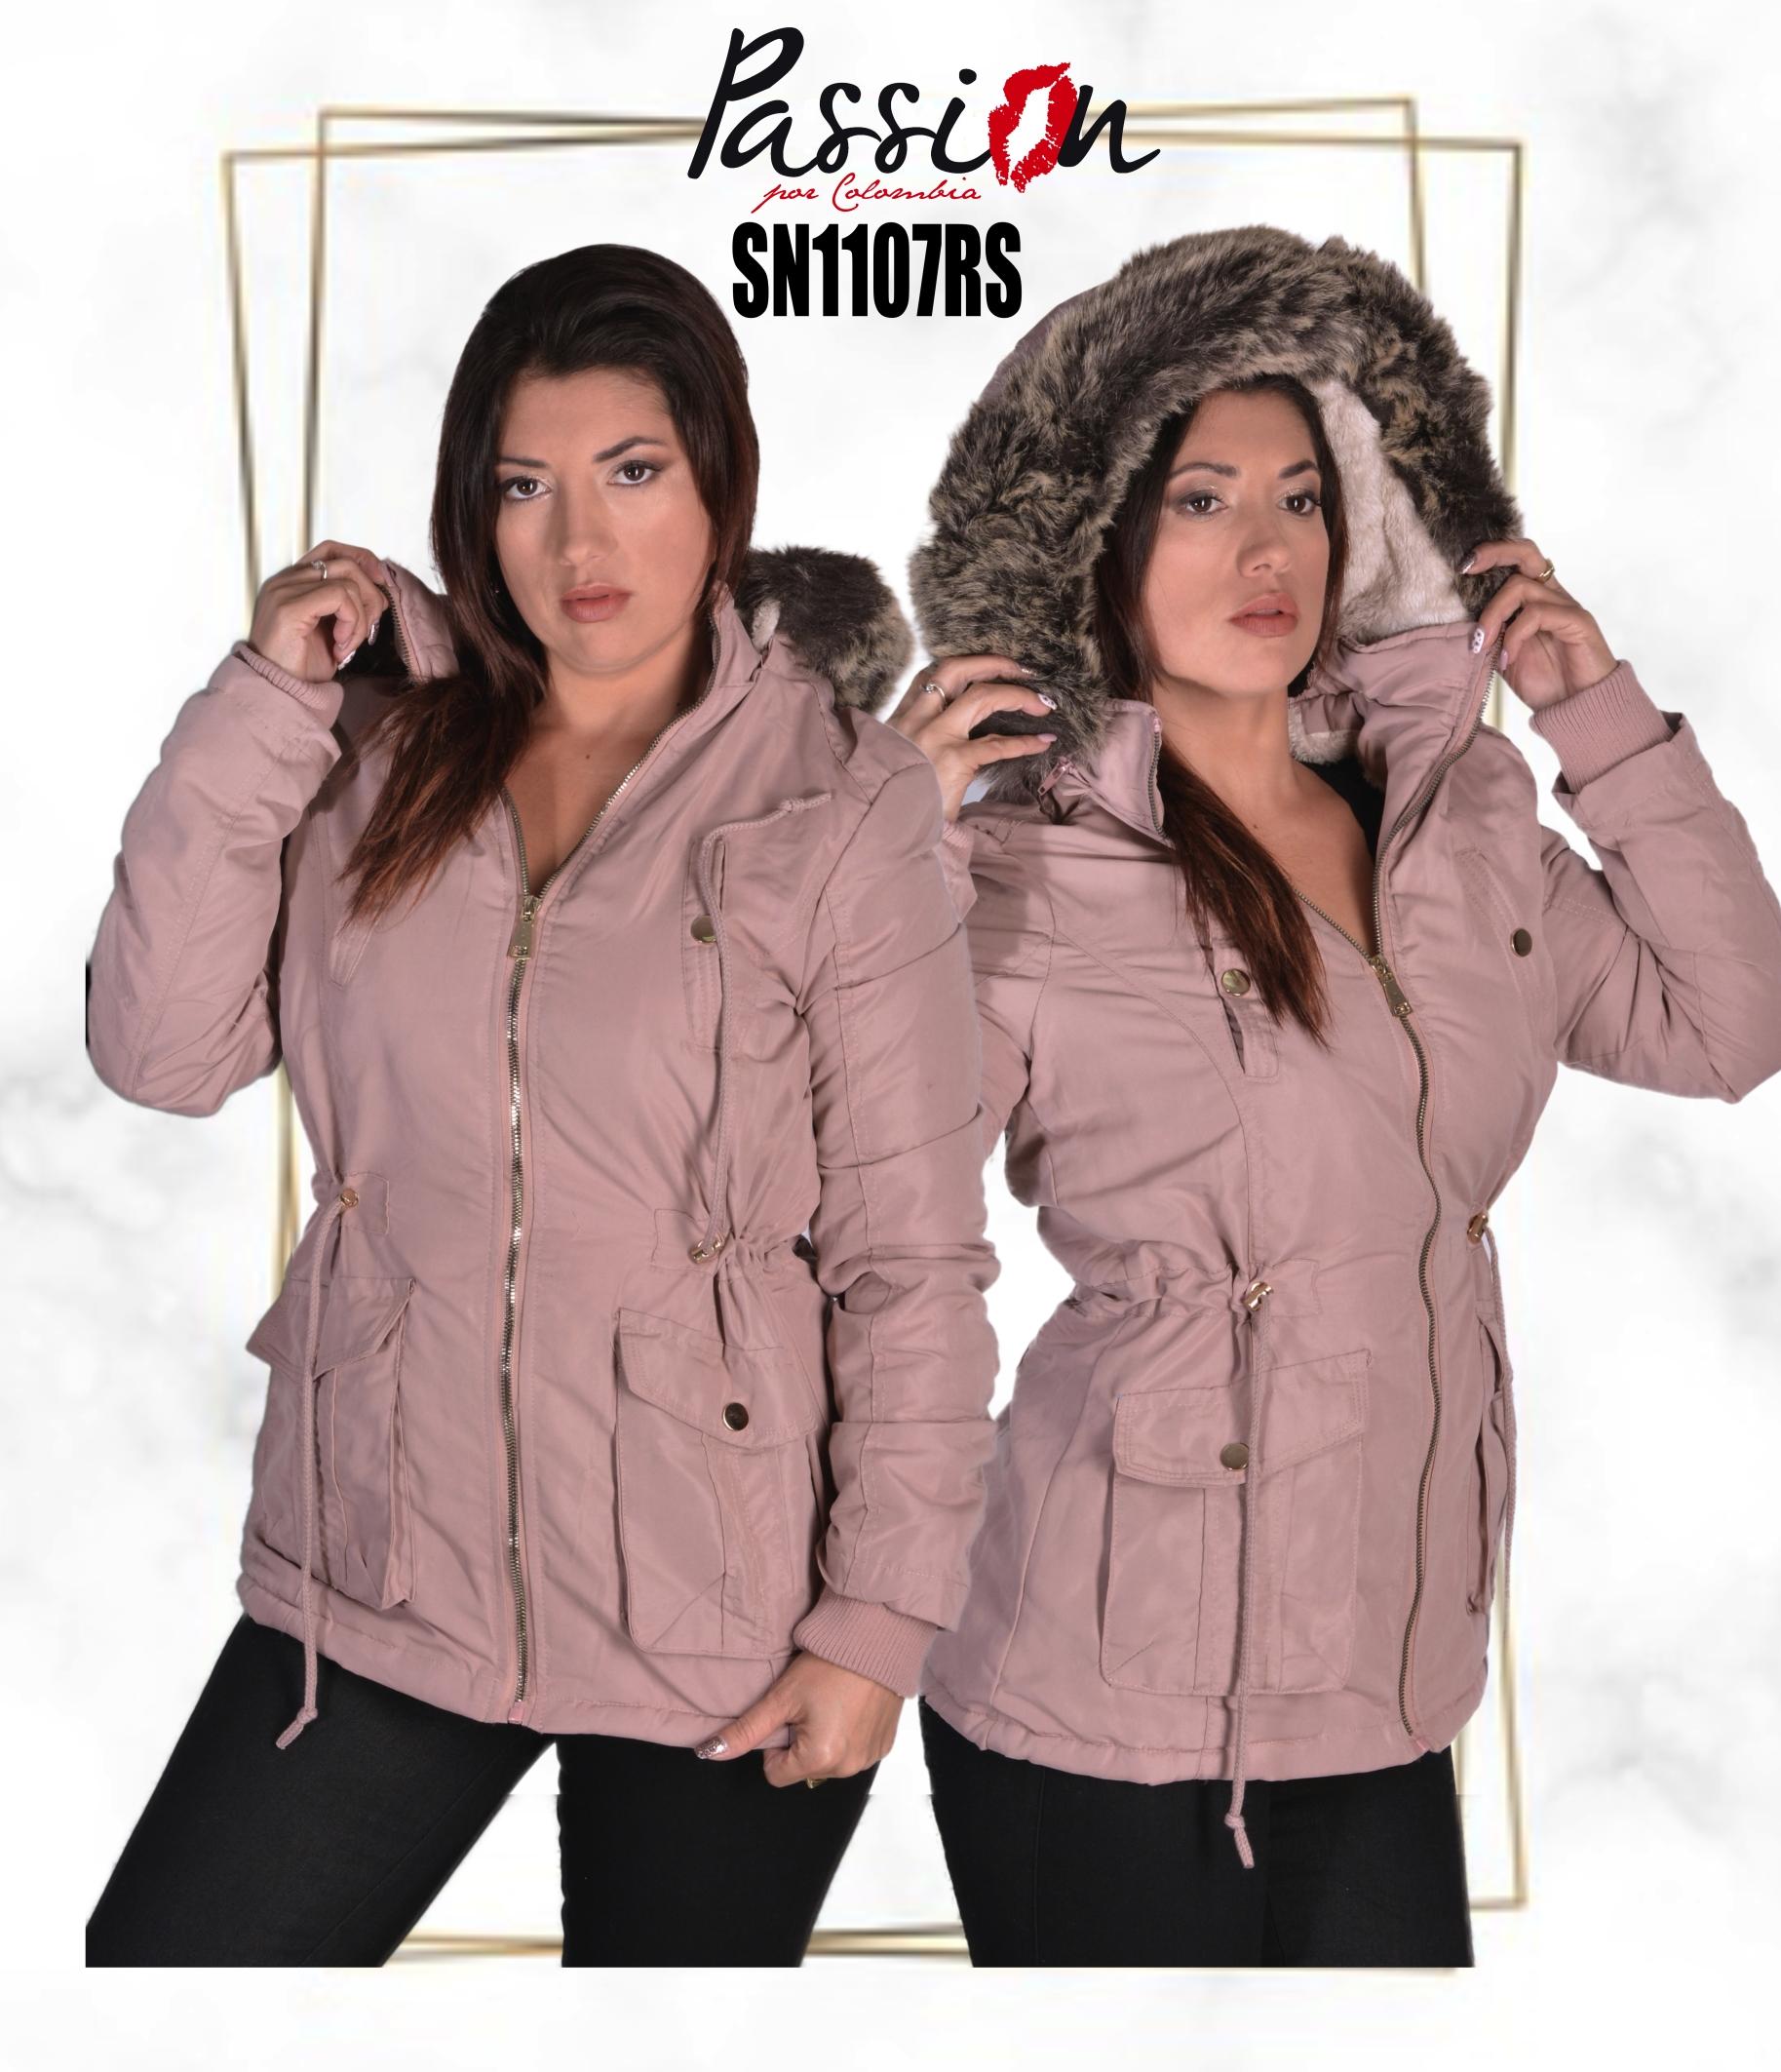 American Style Polar Fashion jacket with front pockets and zippers